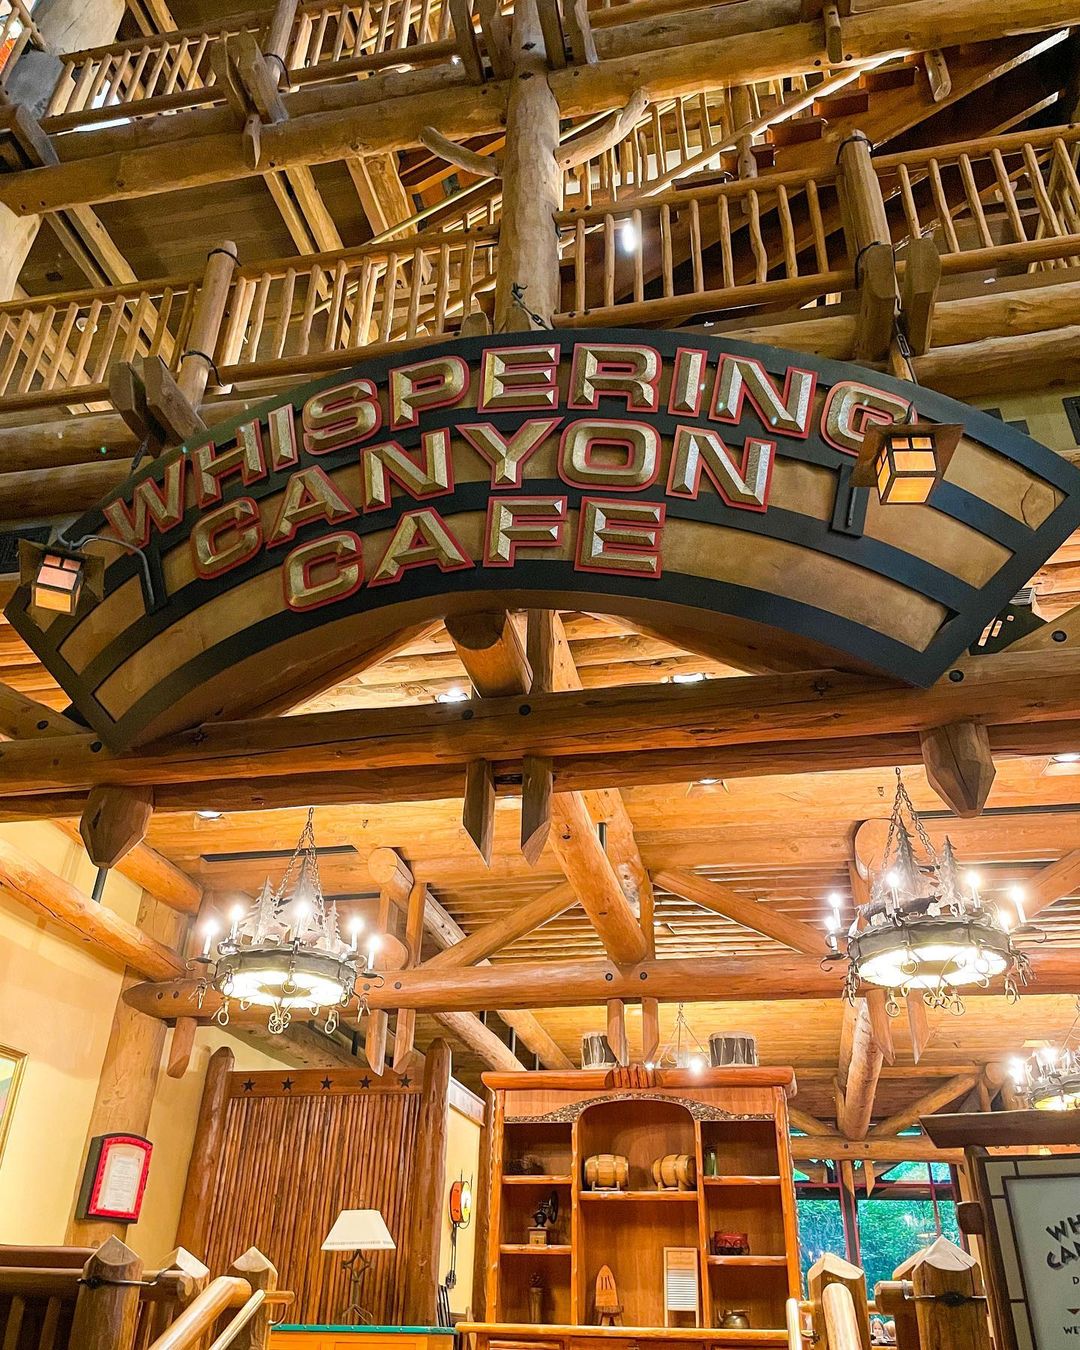 Whispering Canyon - Restaurante Table Service no Wilderness Lodge